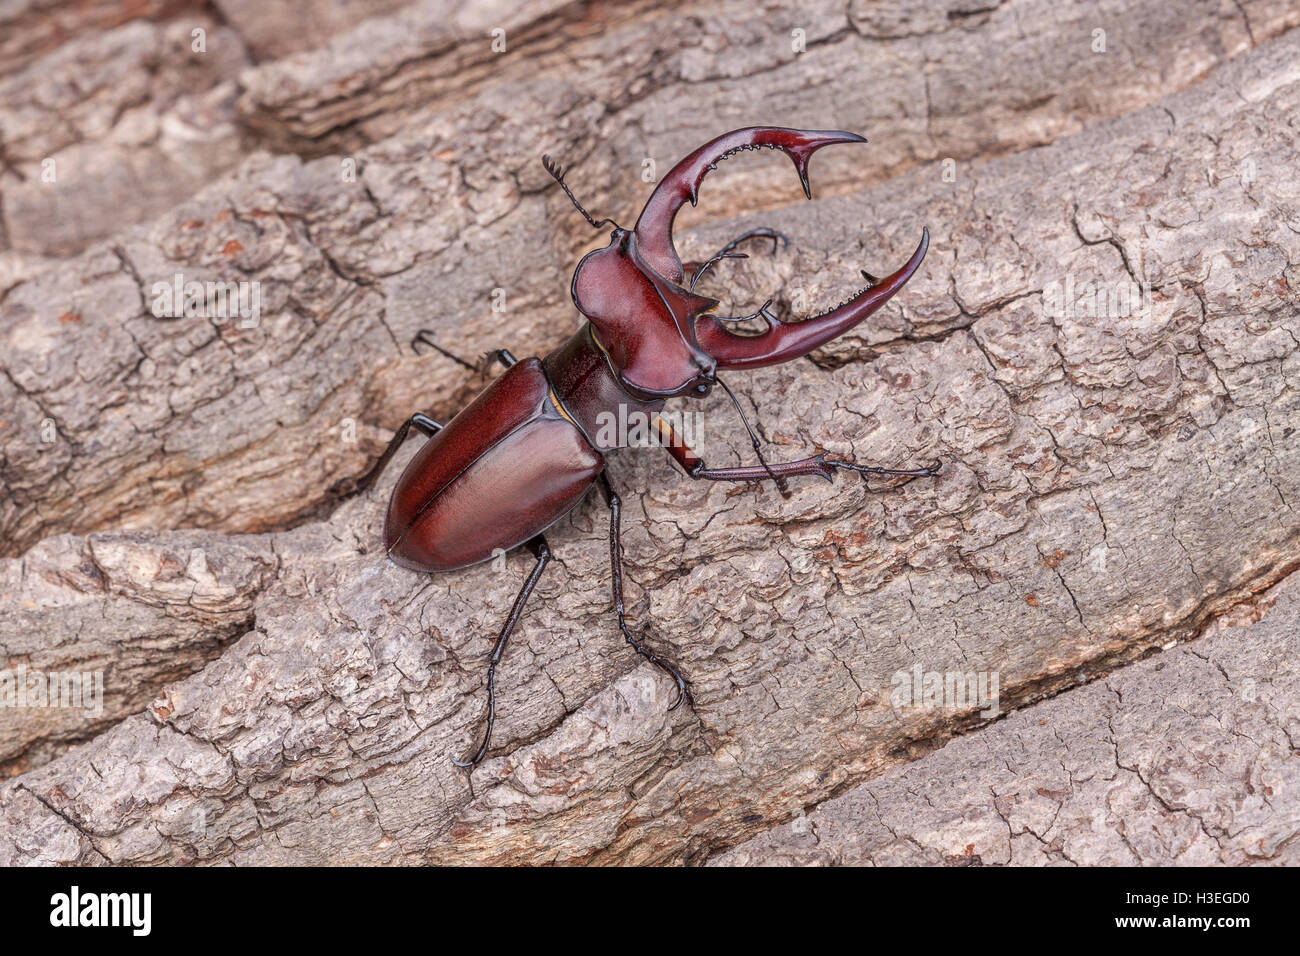 Giant Stag Beetle (Lucanus elaphus) male on side of oak tree along the boardwalk at Congaree National Park in South Carolina. Stock Photo